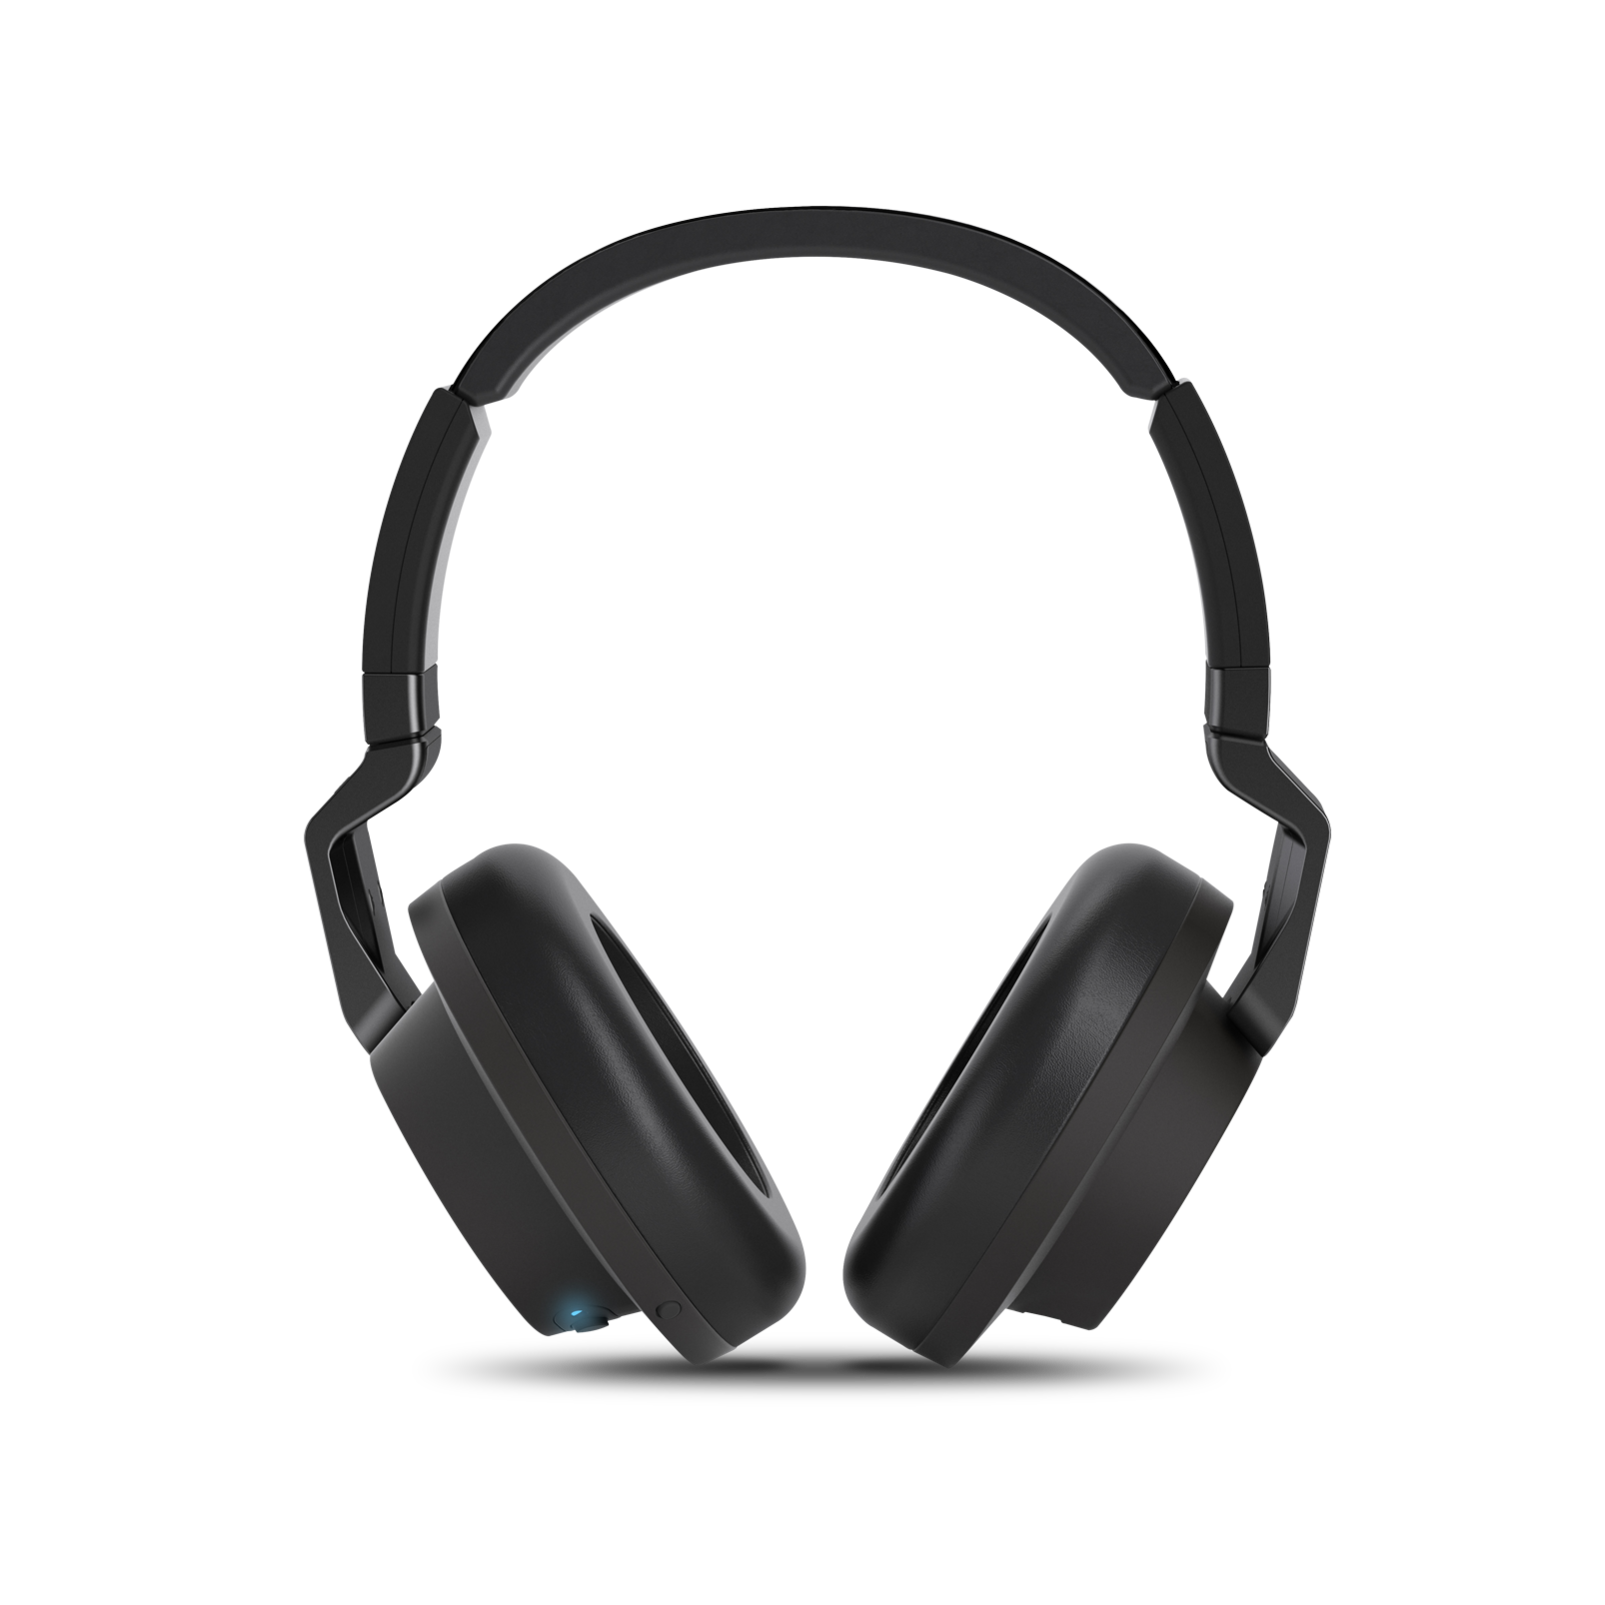 K 845BT | High performance over-ear wireless headphones with Bluetooth up  to 8 hours playback